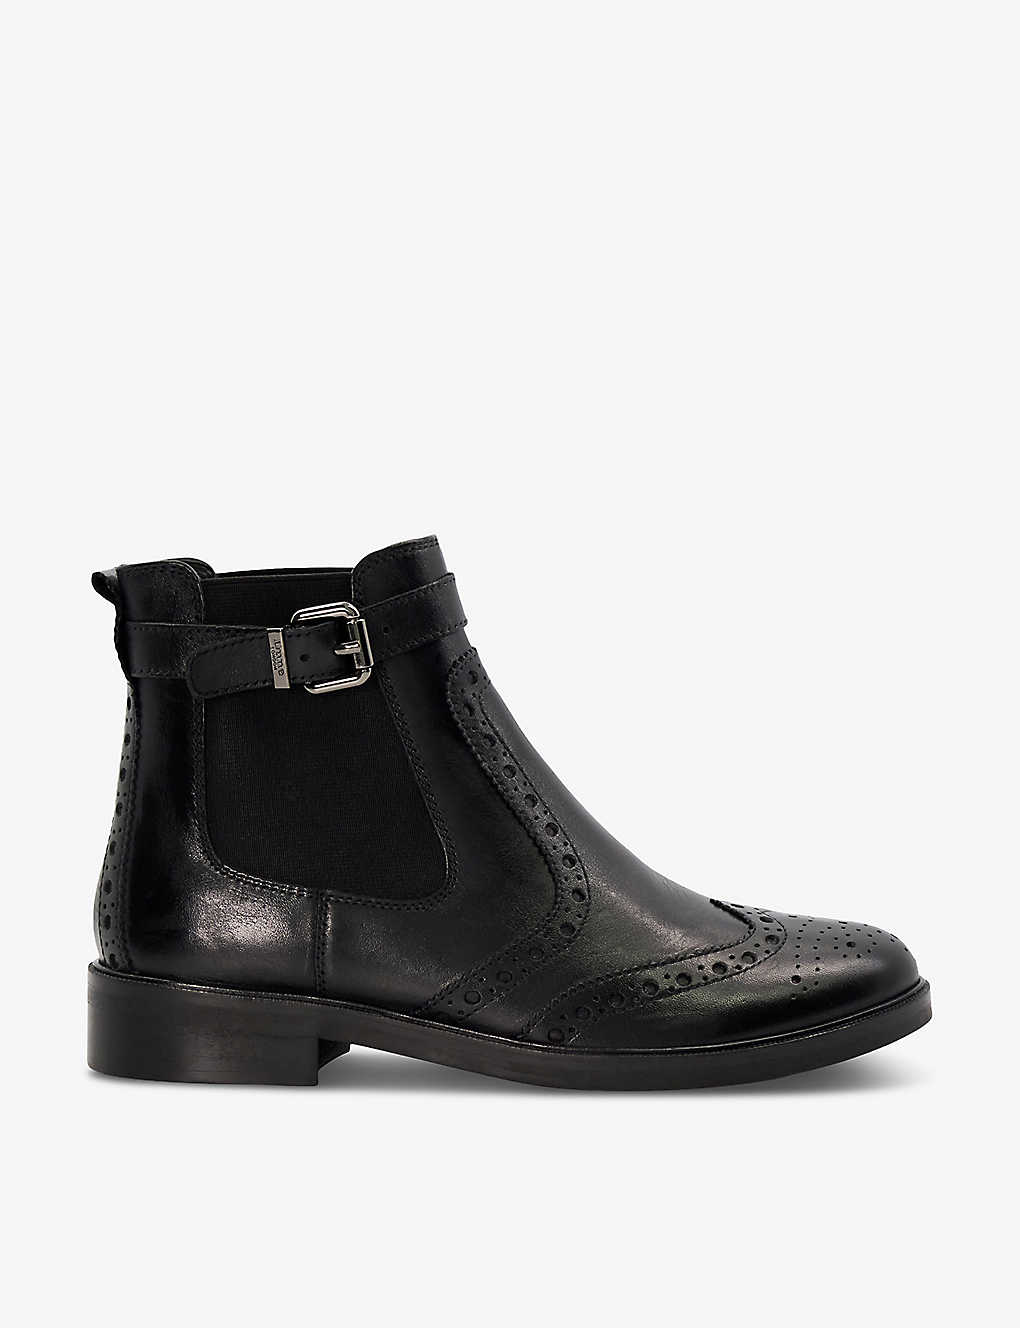 Dune Womens Black-leather Question Brogue-design Leather Chelsea Boots